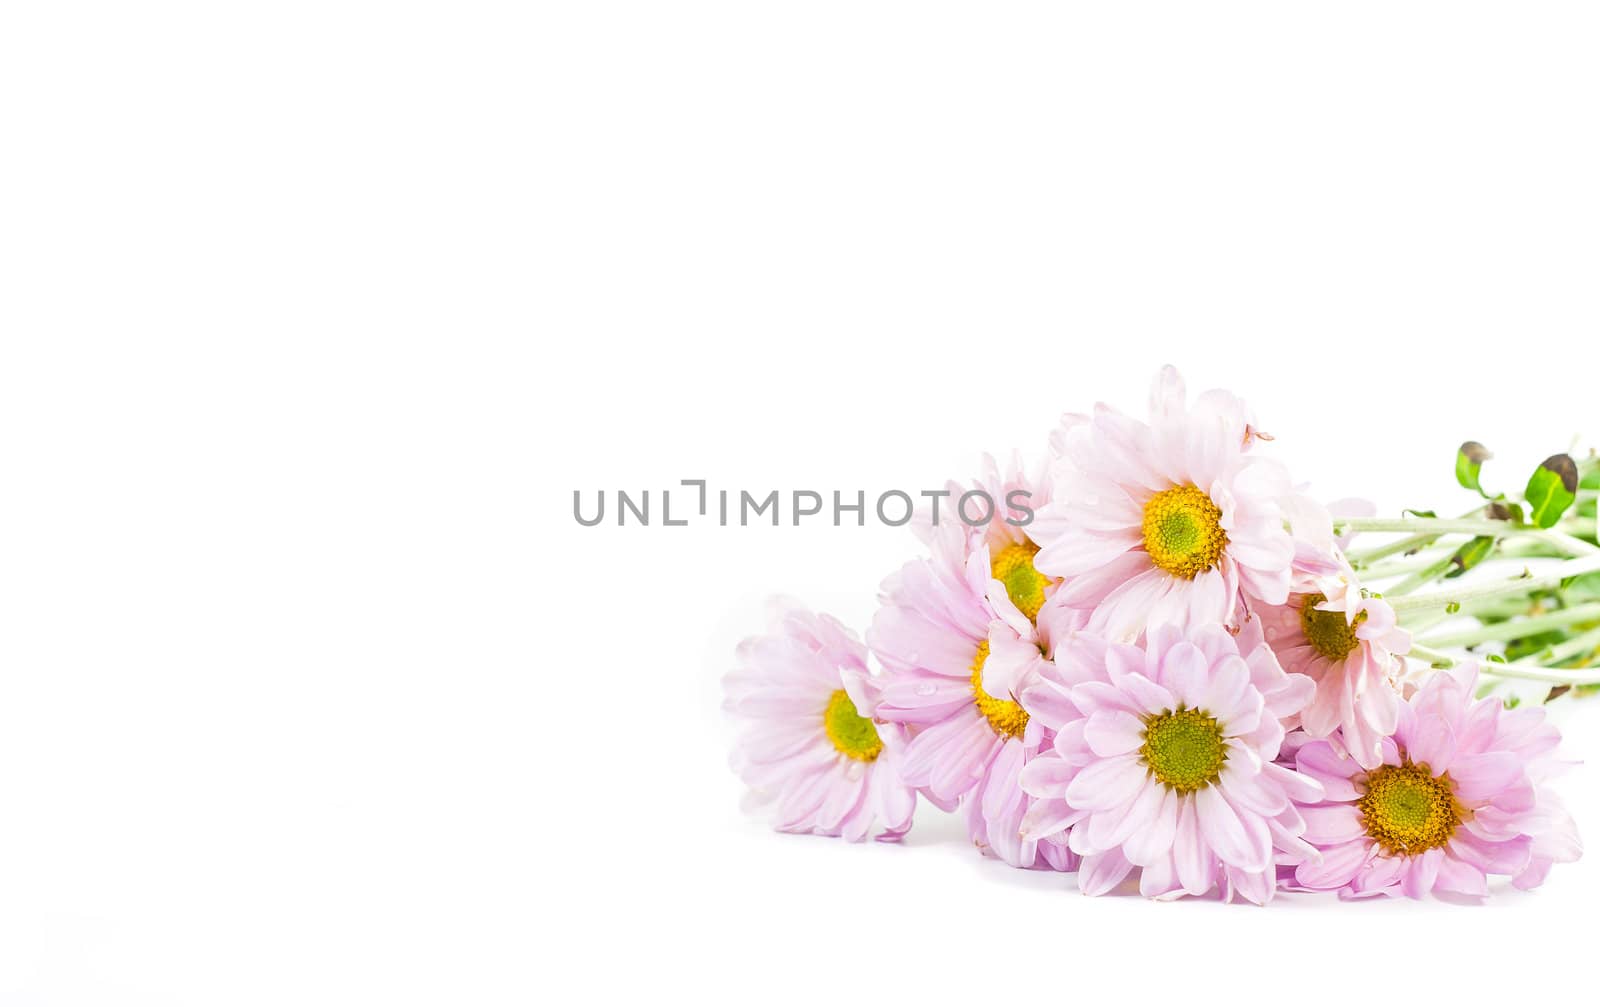 Blue Chrysanthemums flower isolate on white background